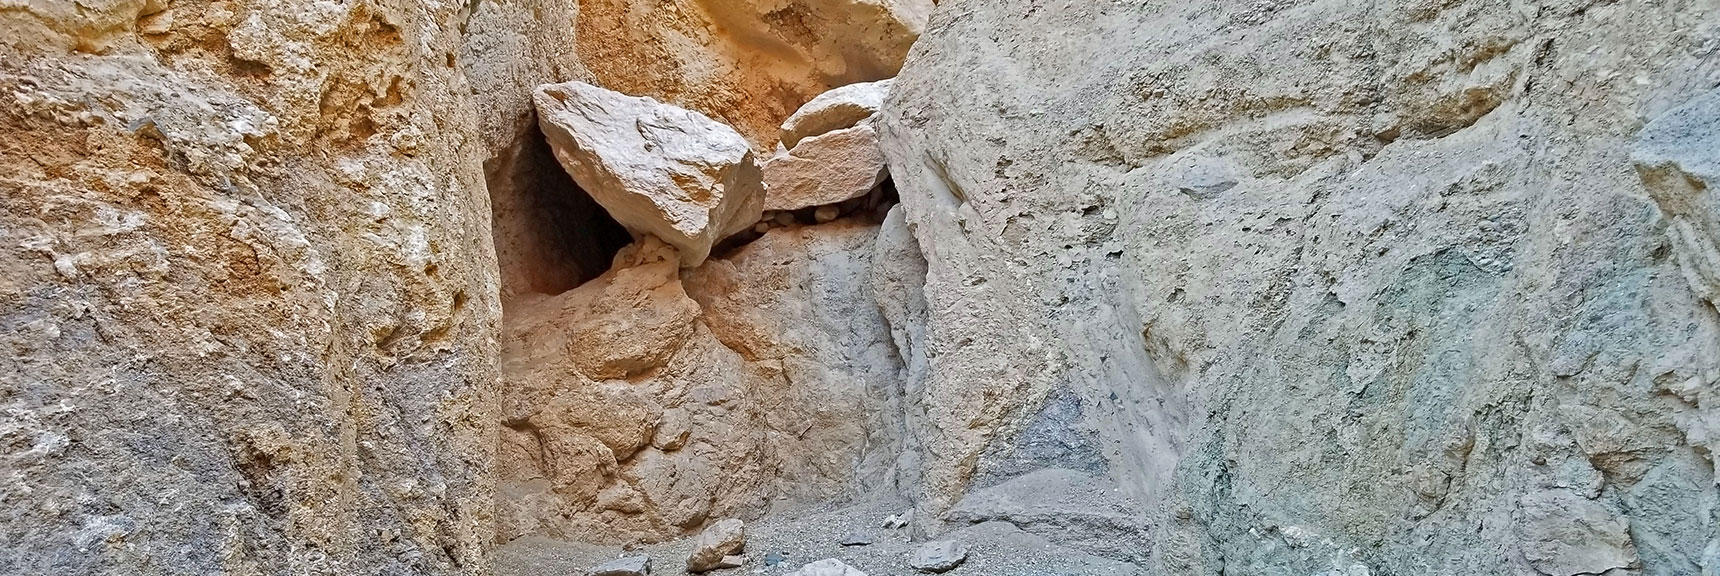 Final Turn-Around Barrier. Possible to Surmount but Challenging | Artists Drive Hidden Canyon Hikes | Death Valley National Park, California